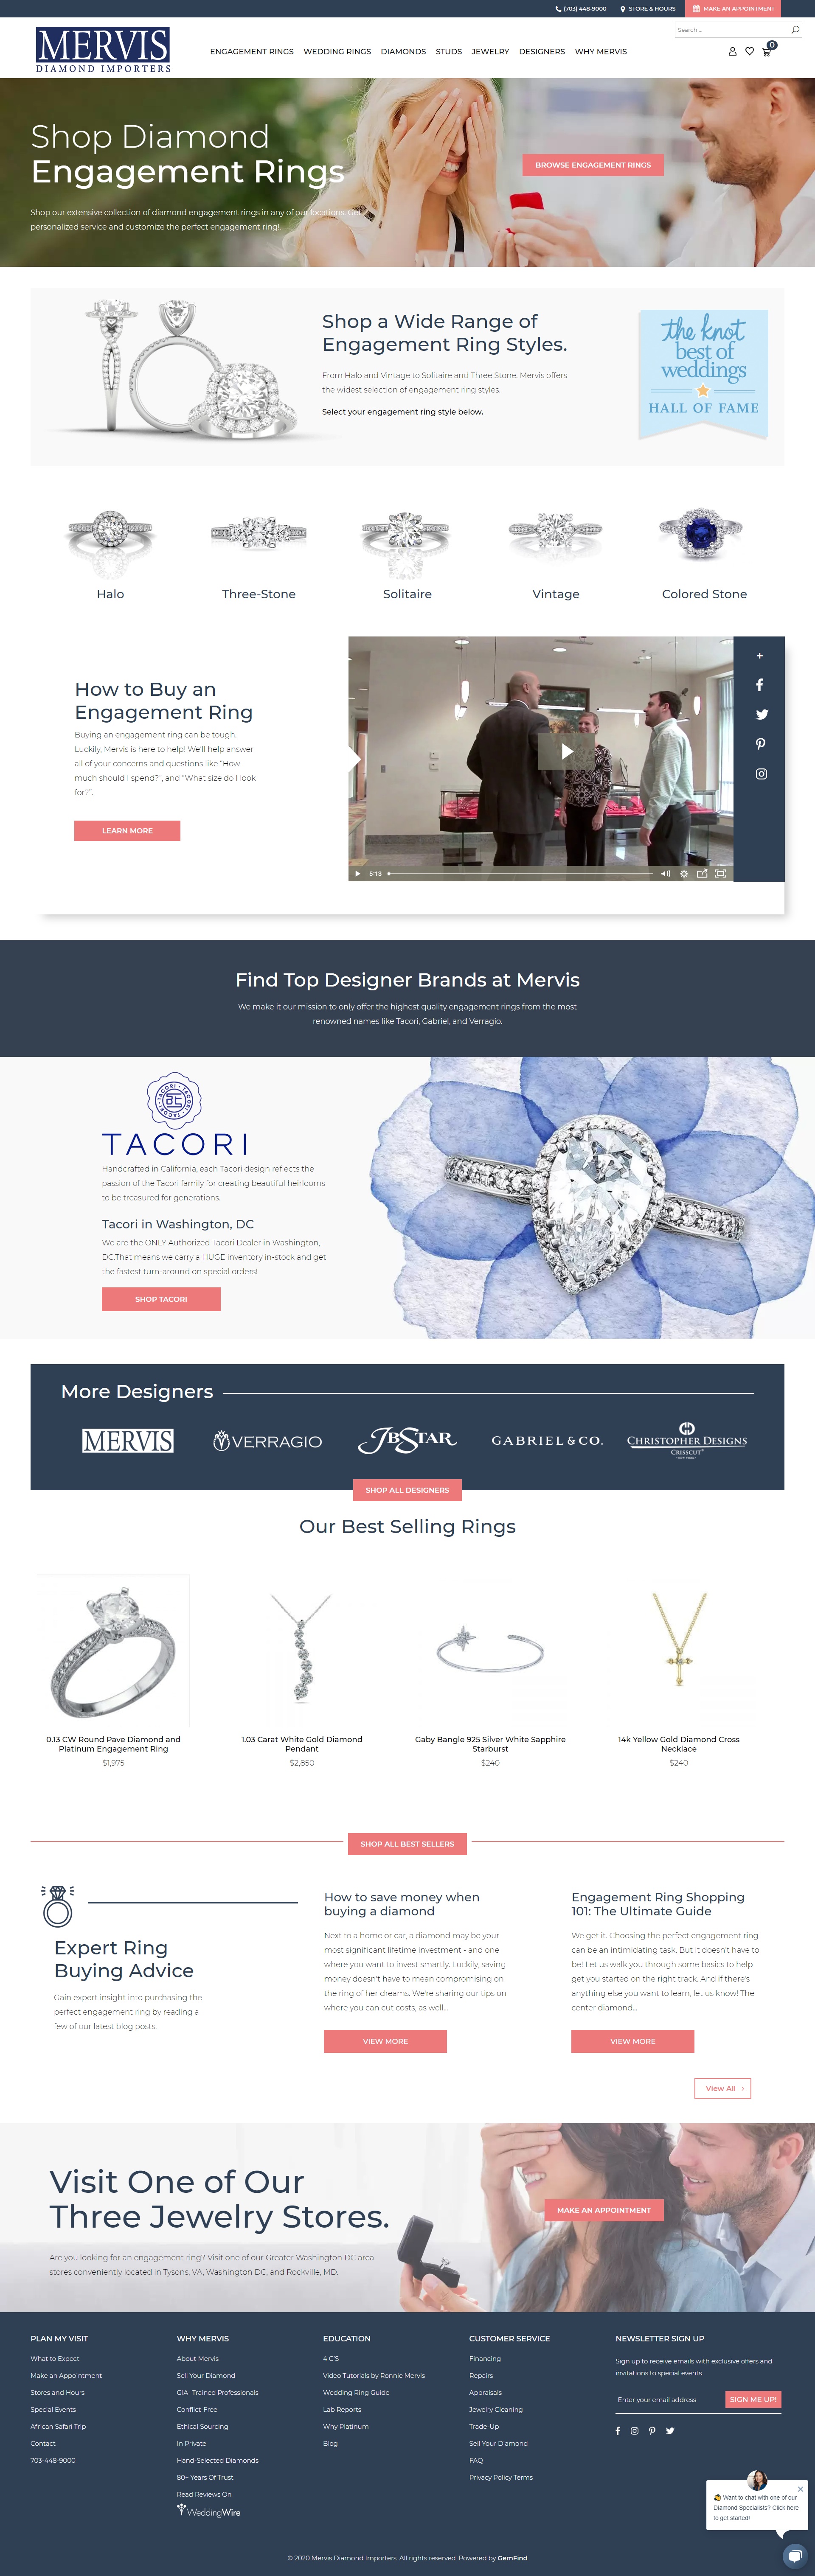 Jewelry Store Website Landing Page